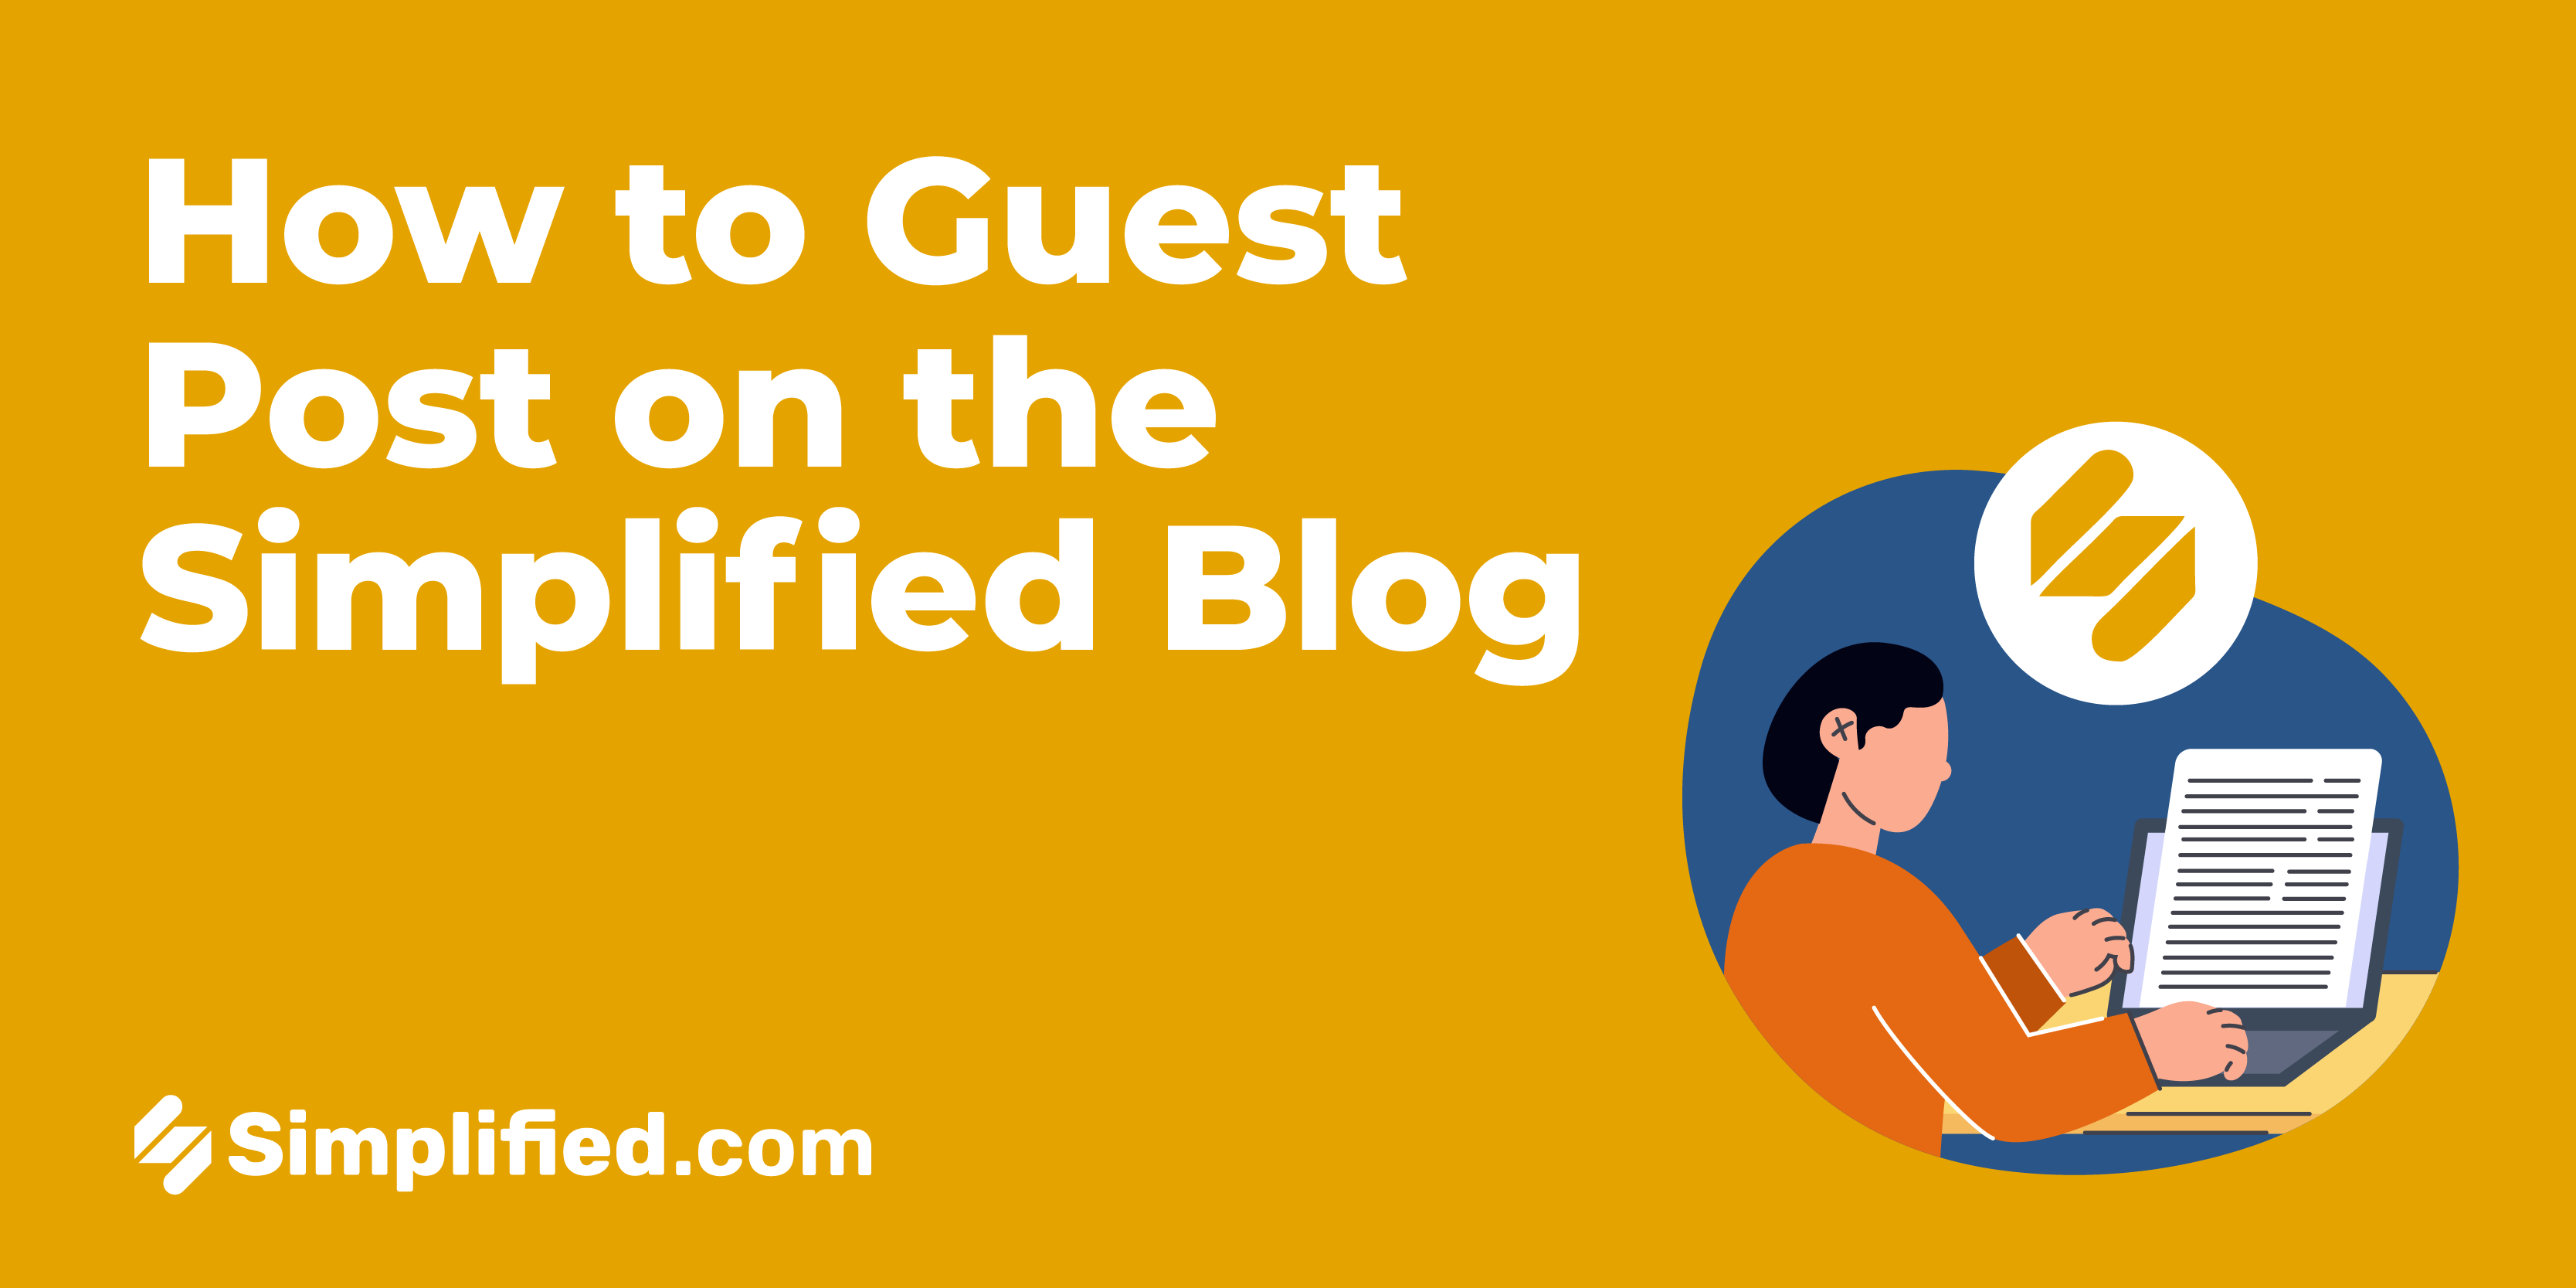 Write For Us: How to Guest Post on the Simplified Blog